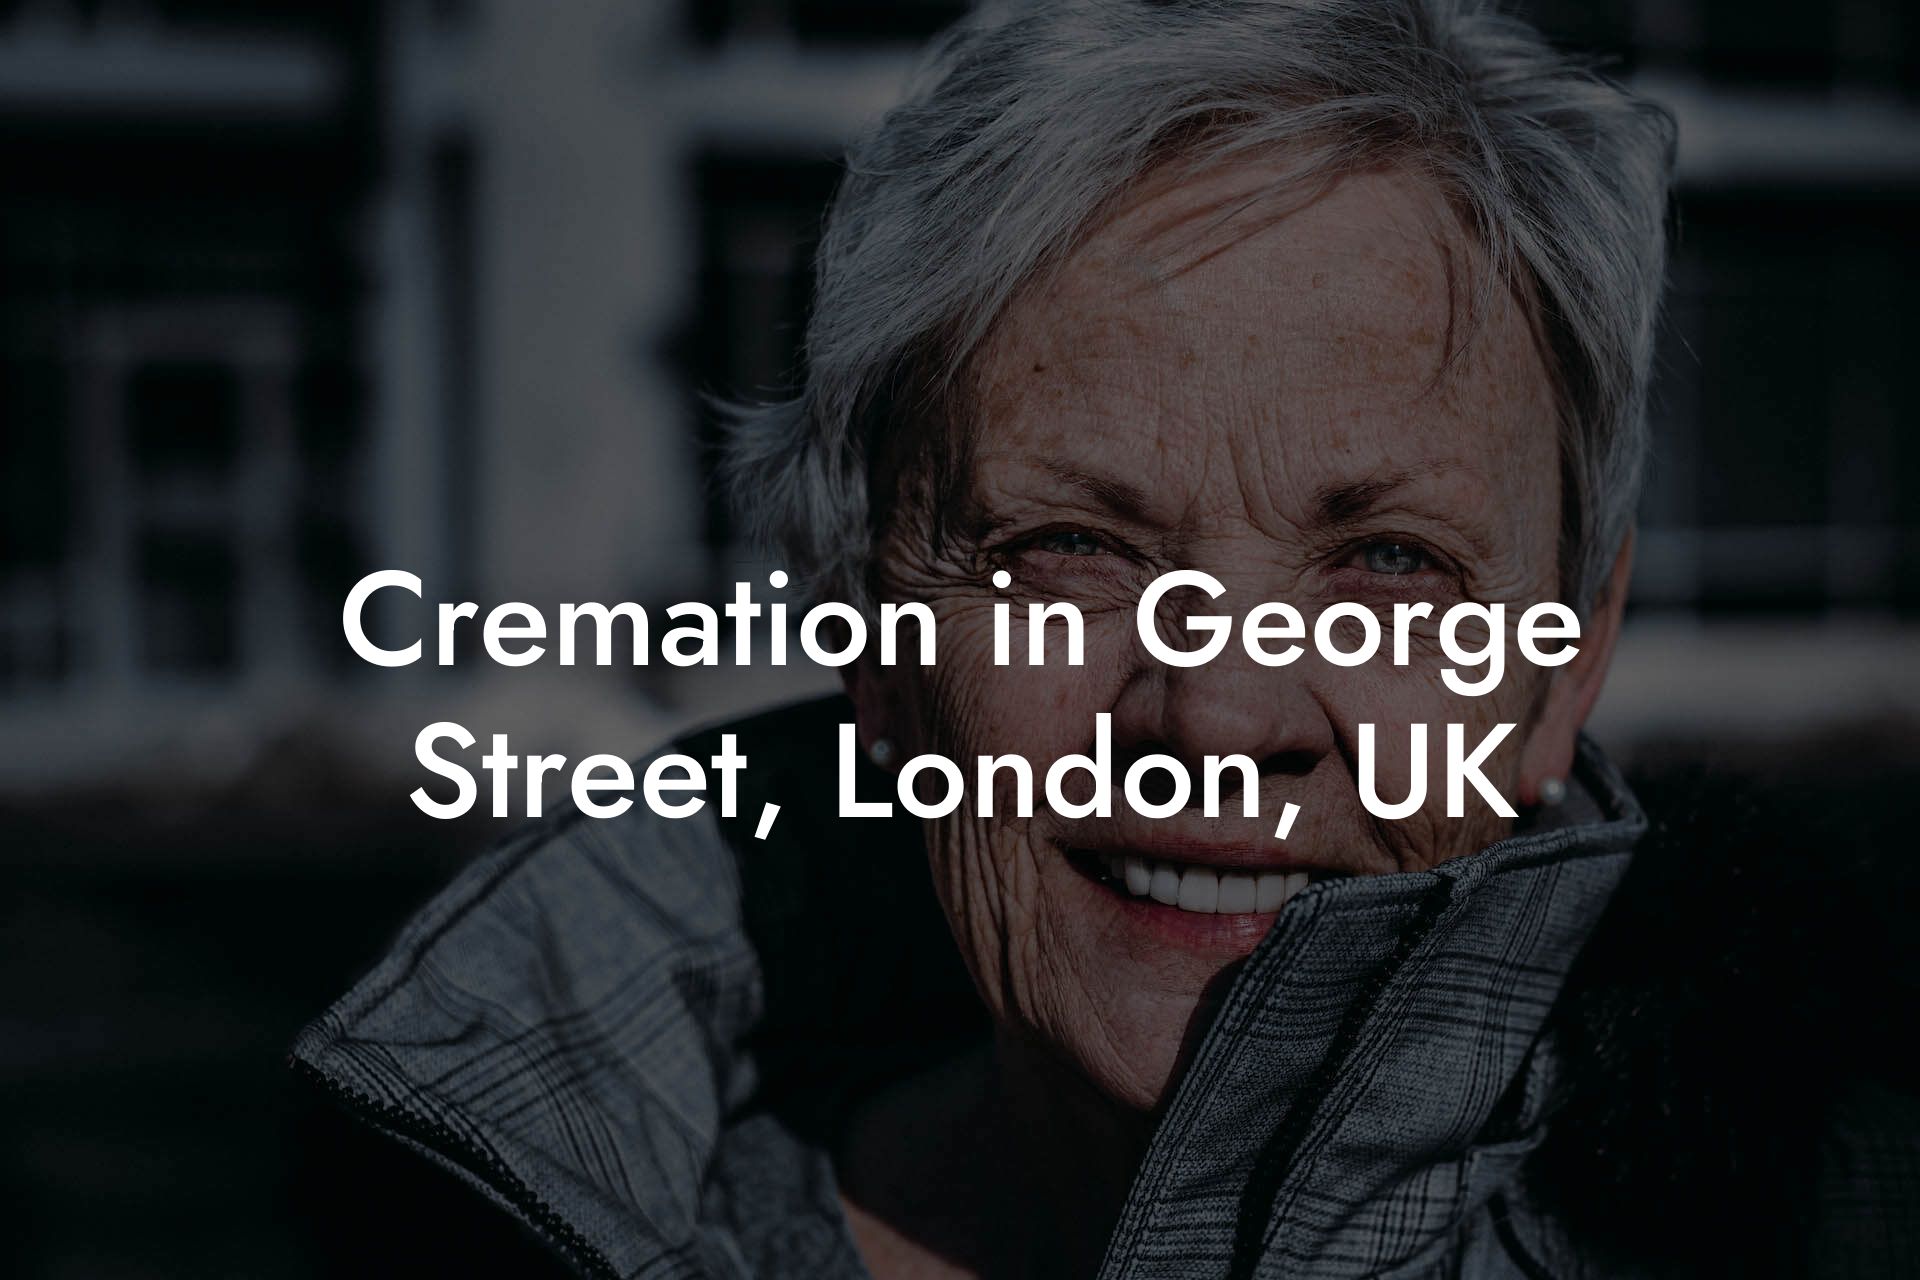 Cremation in George Street, London, UK